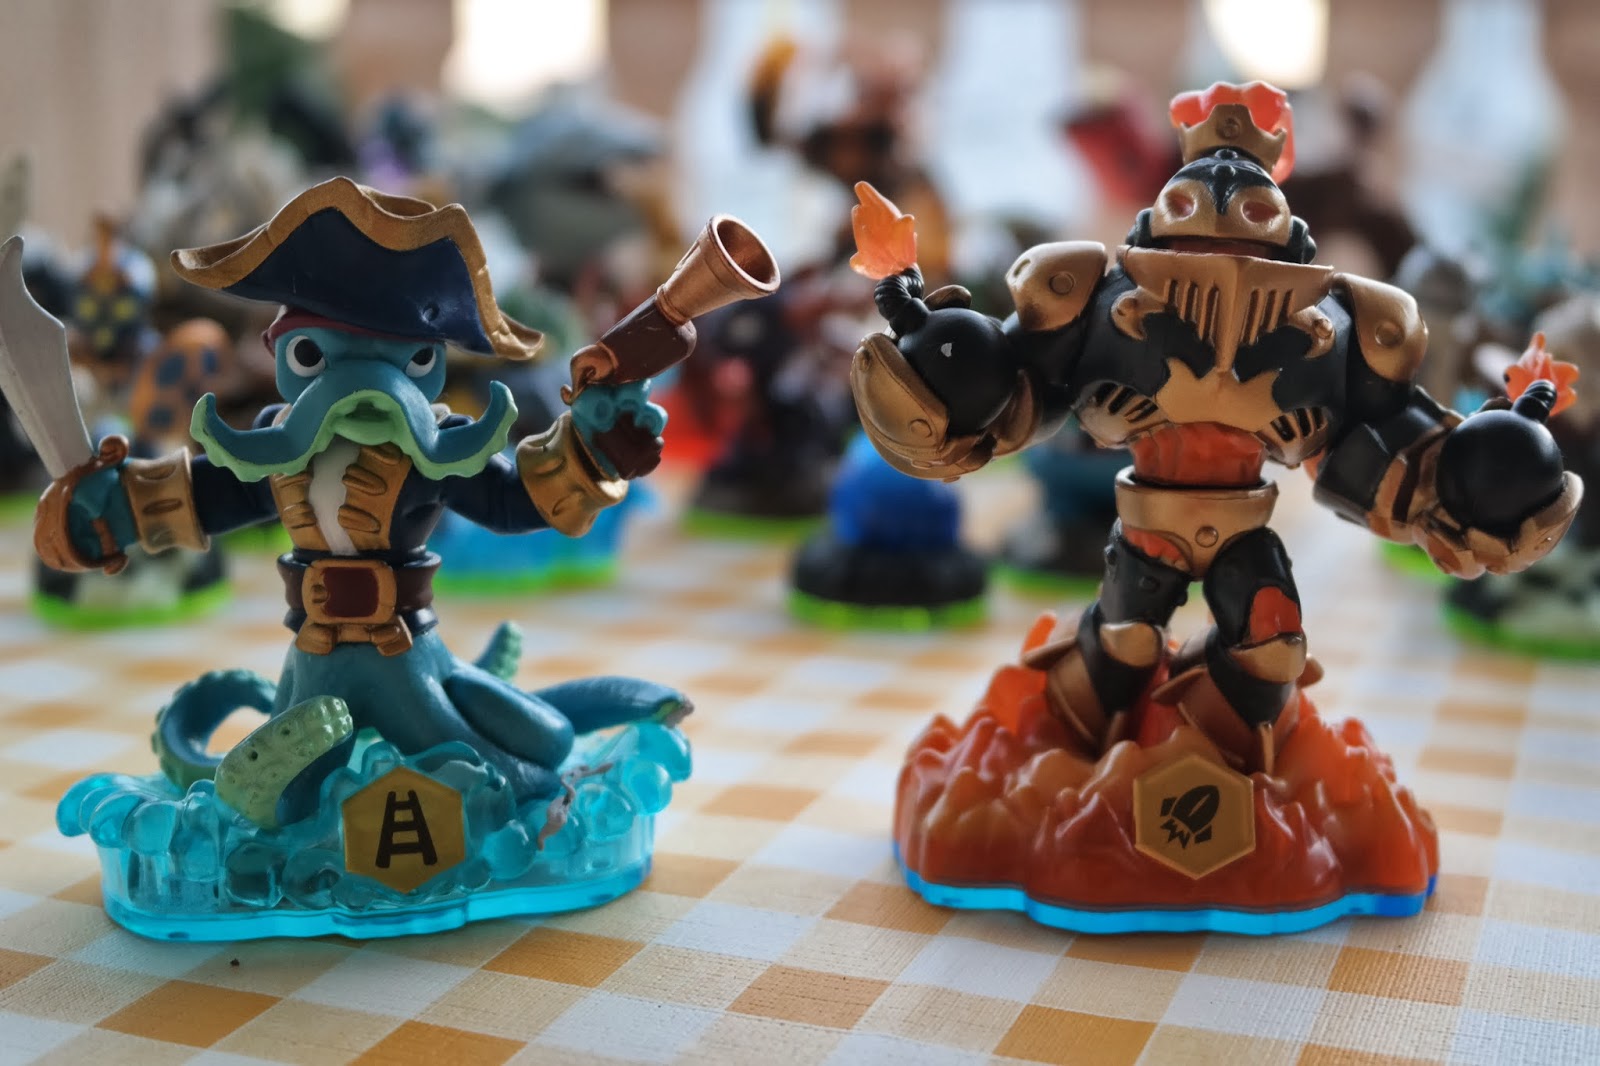 Following this, Skylanders Trap Team introduced 'traps'. 